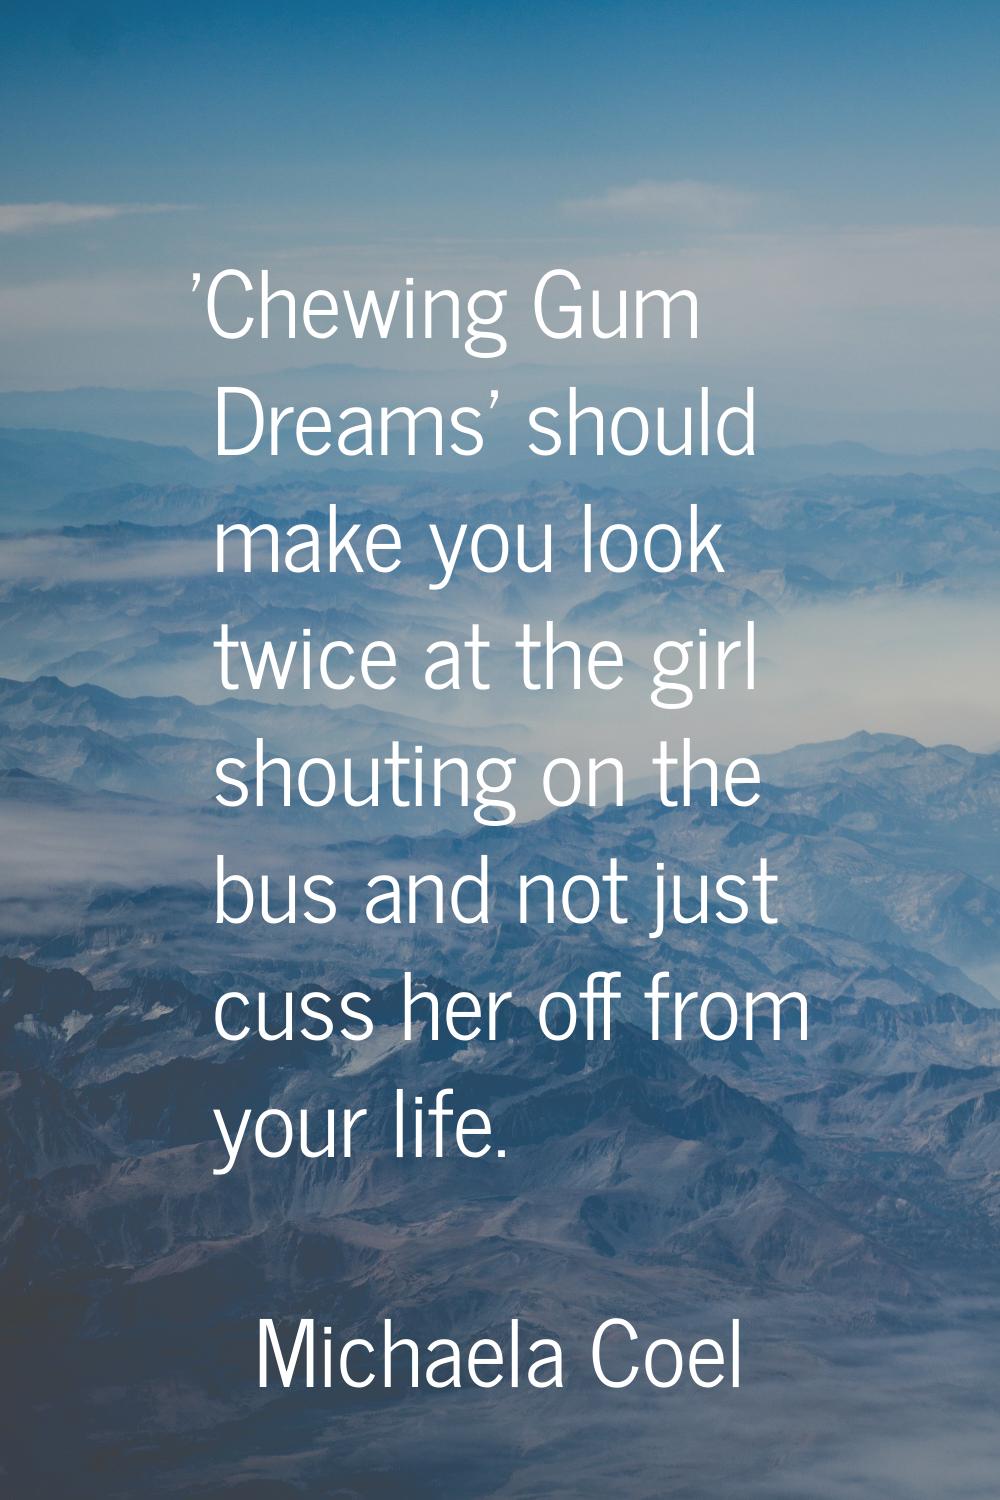 'Chewing Gum Dreams' should make you look twice at the girl shouting on the bus and not just cuss h